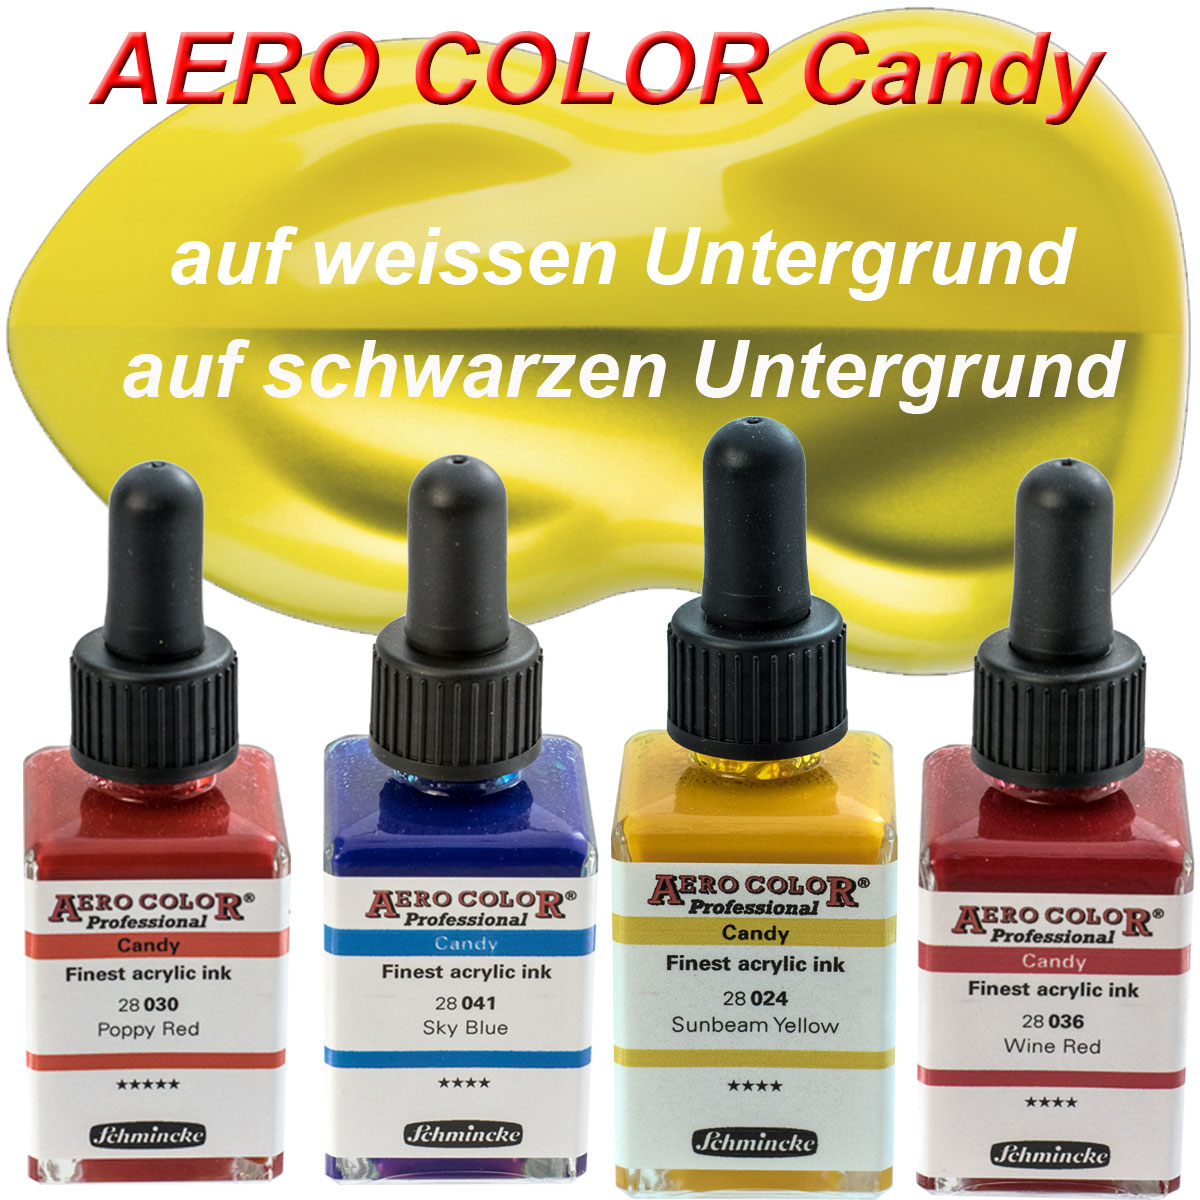 Candy Farben